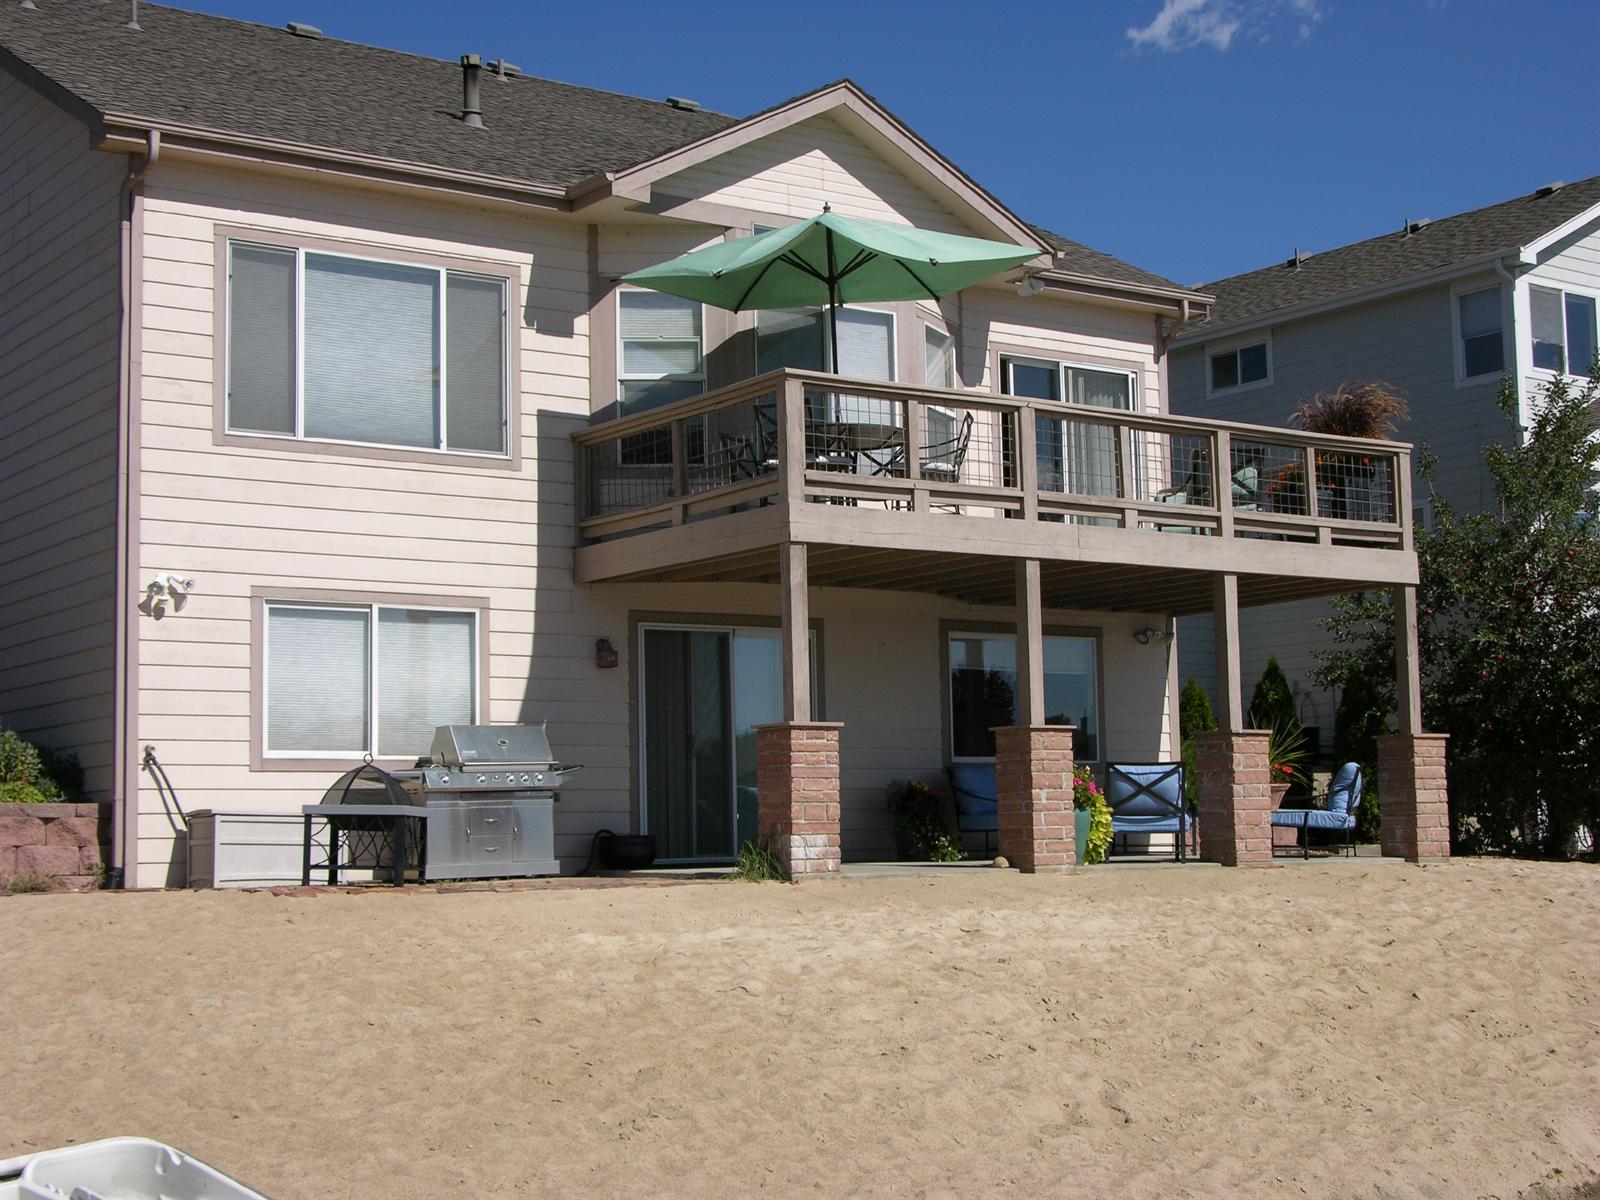 Rear of house faces the lake, with a sandy beach and boat dock